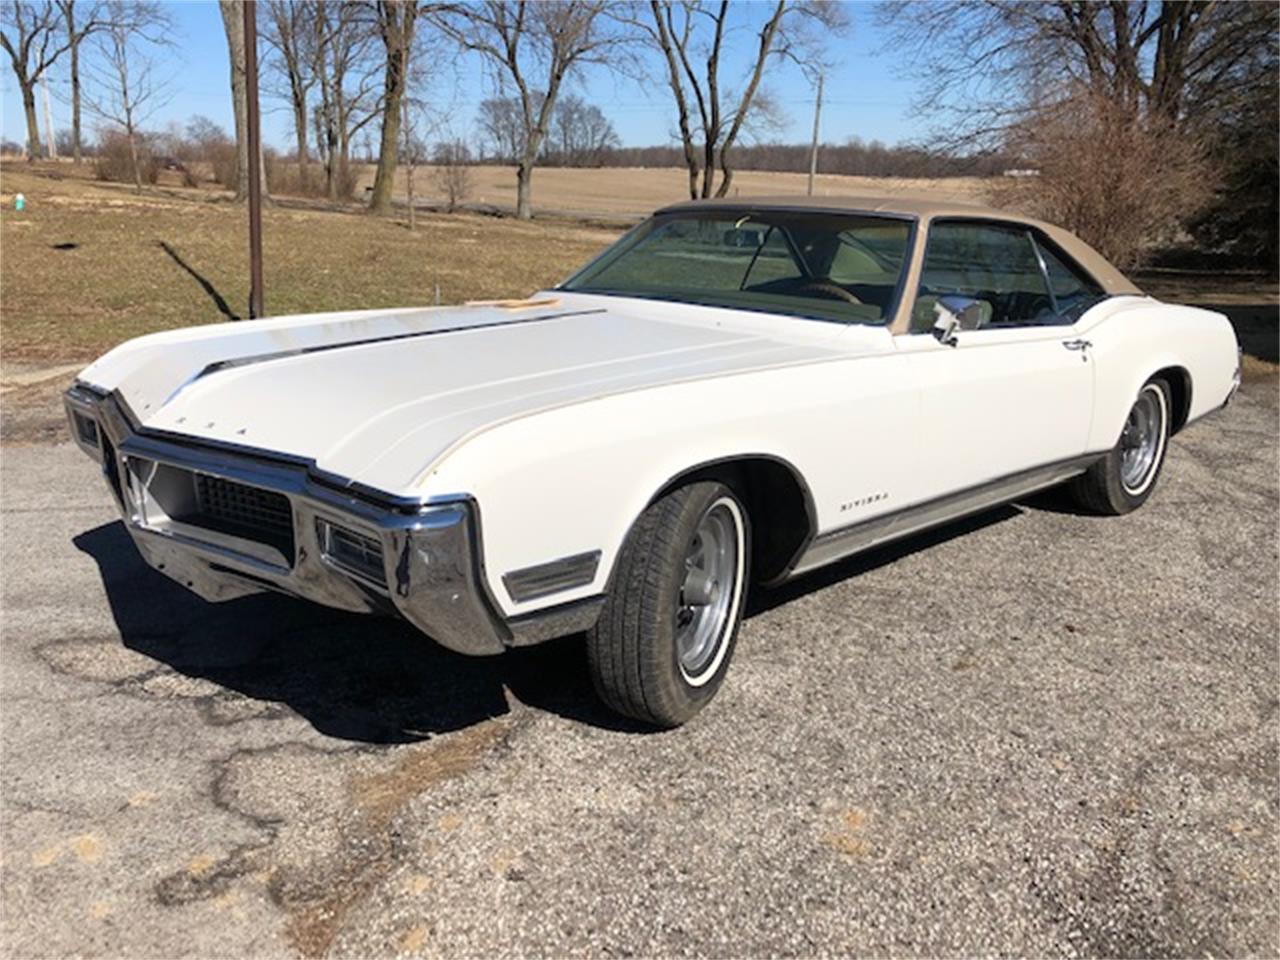 1968 buick riviera for sale classiccars com cc 1201722 1968 buick riviera for sale